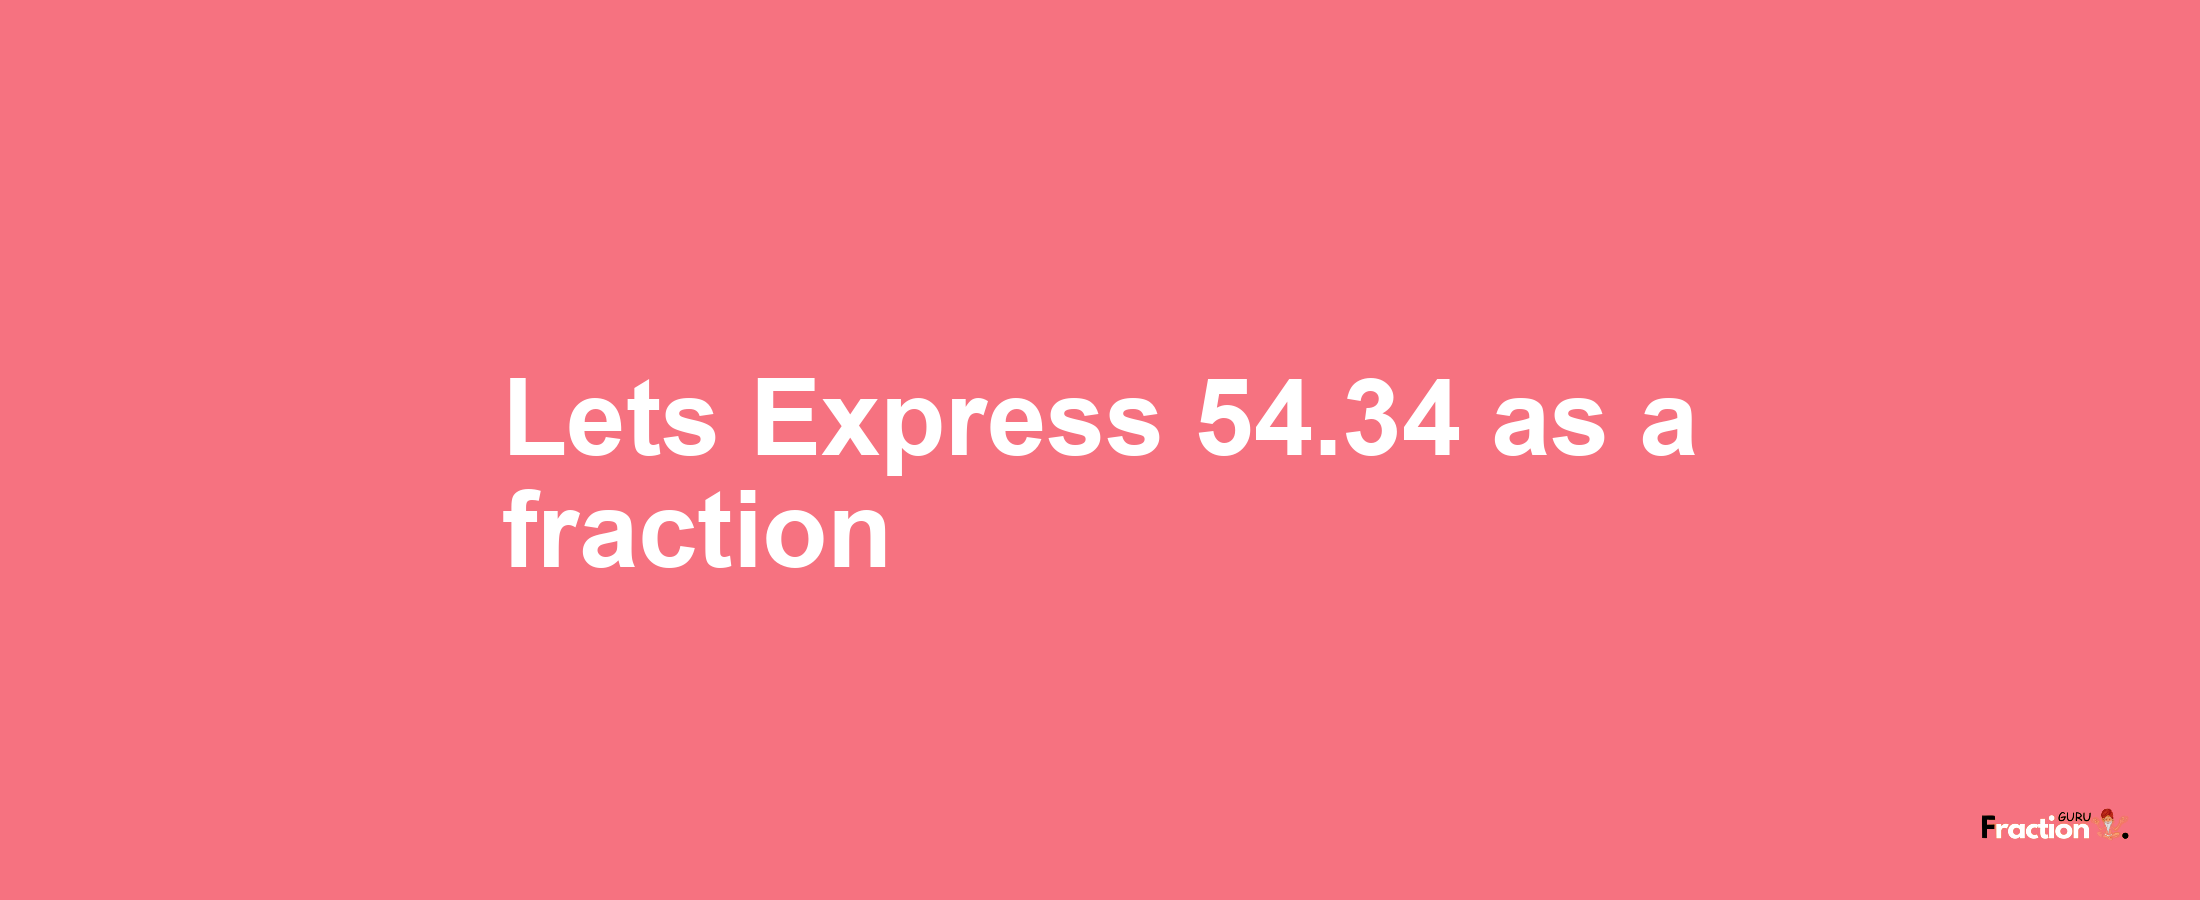 Lets Express 54.34 as afraction